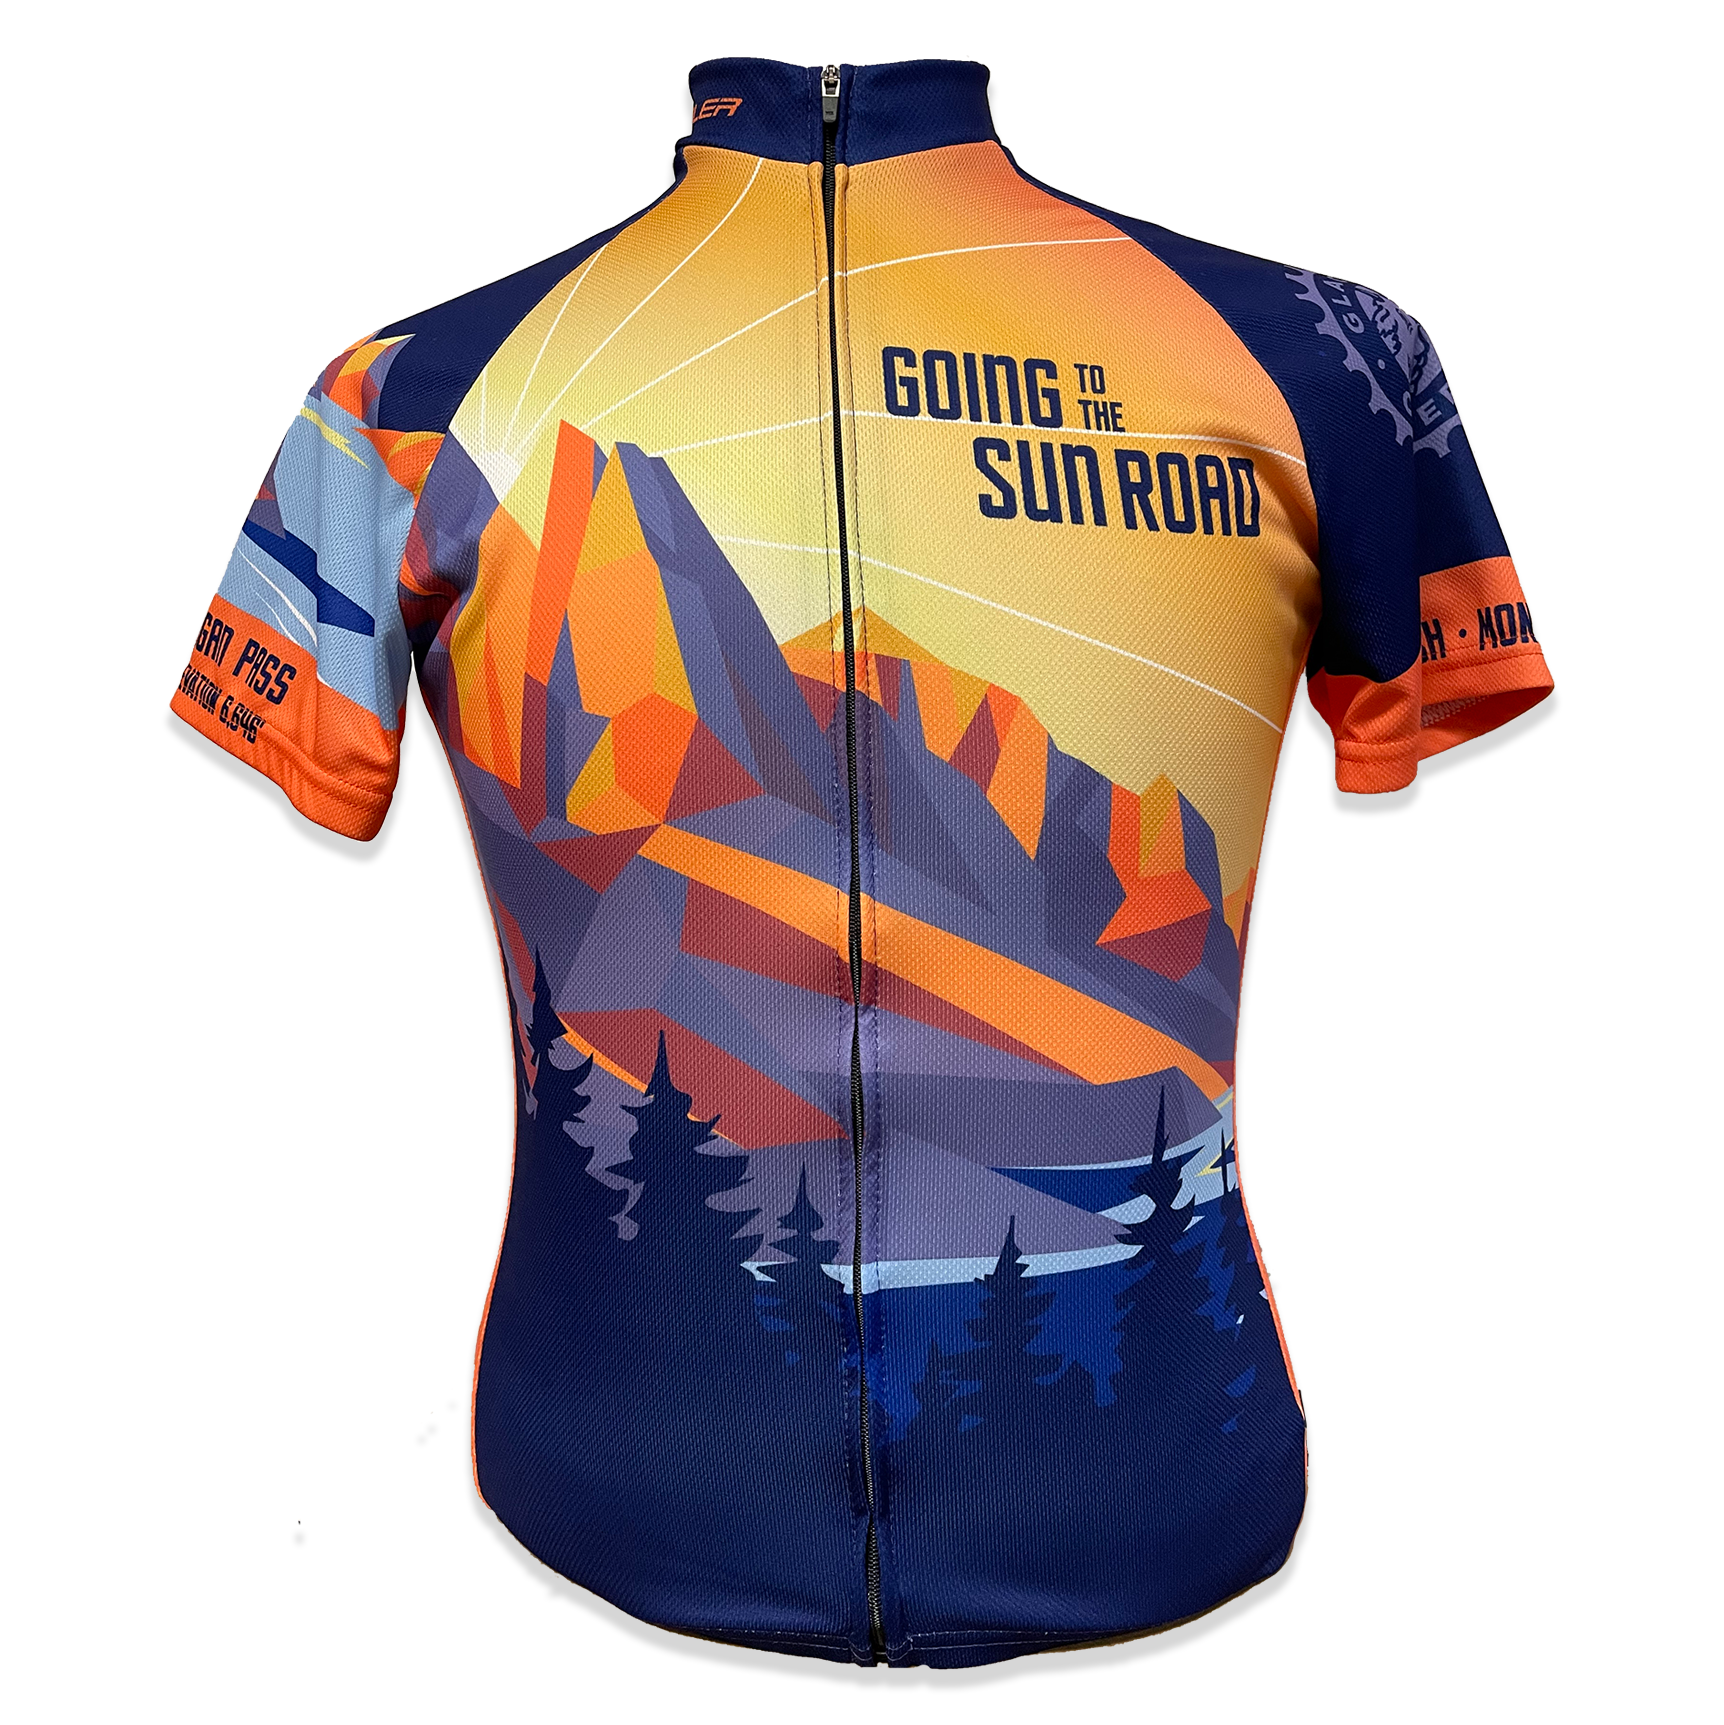 NEW! Men's Going-To-the-Sun Jersey